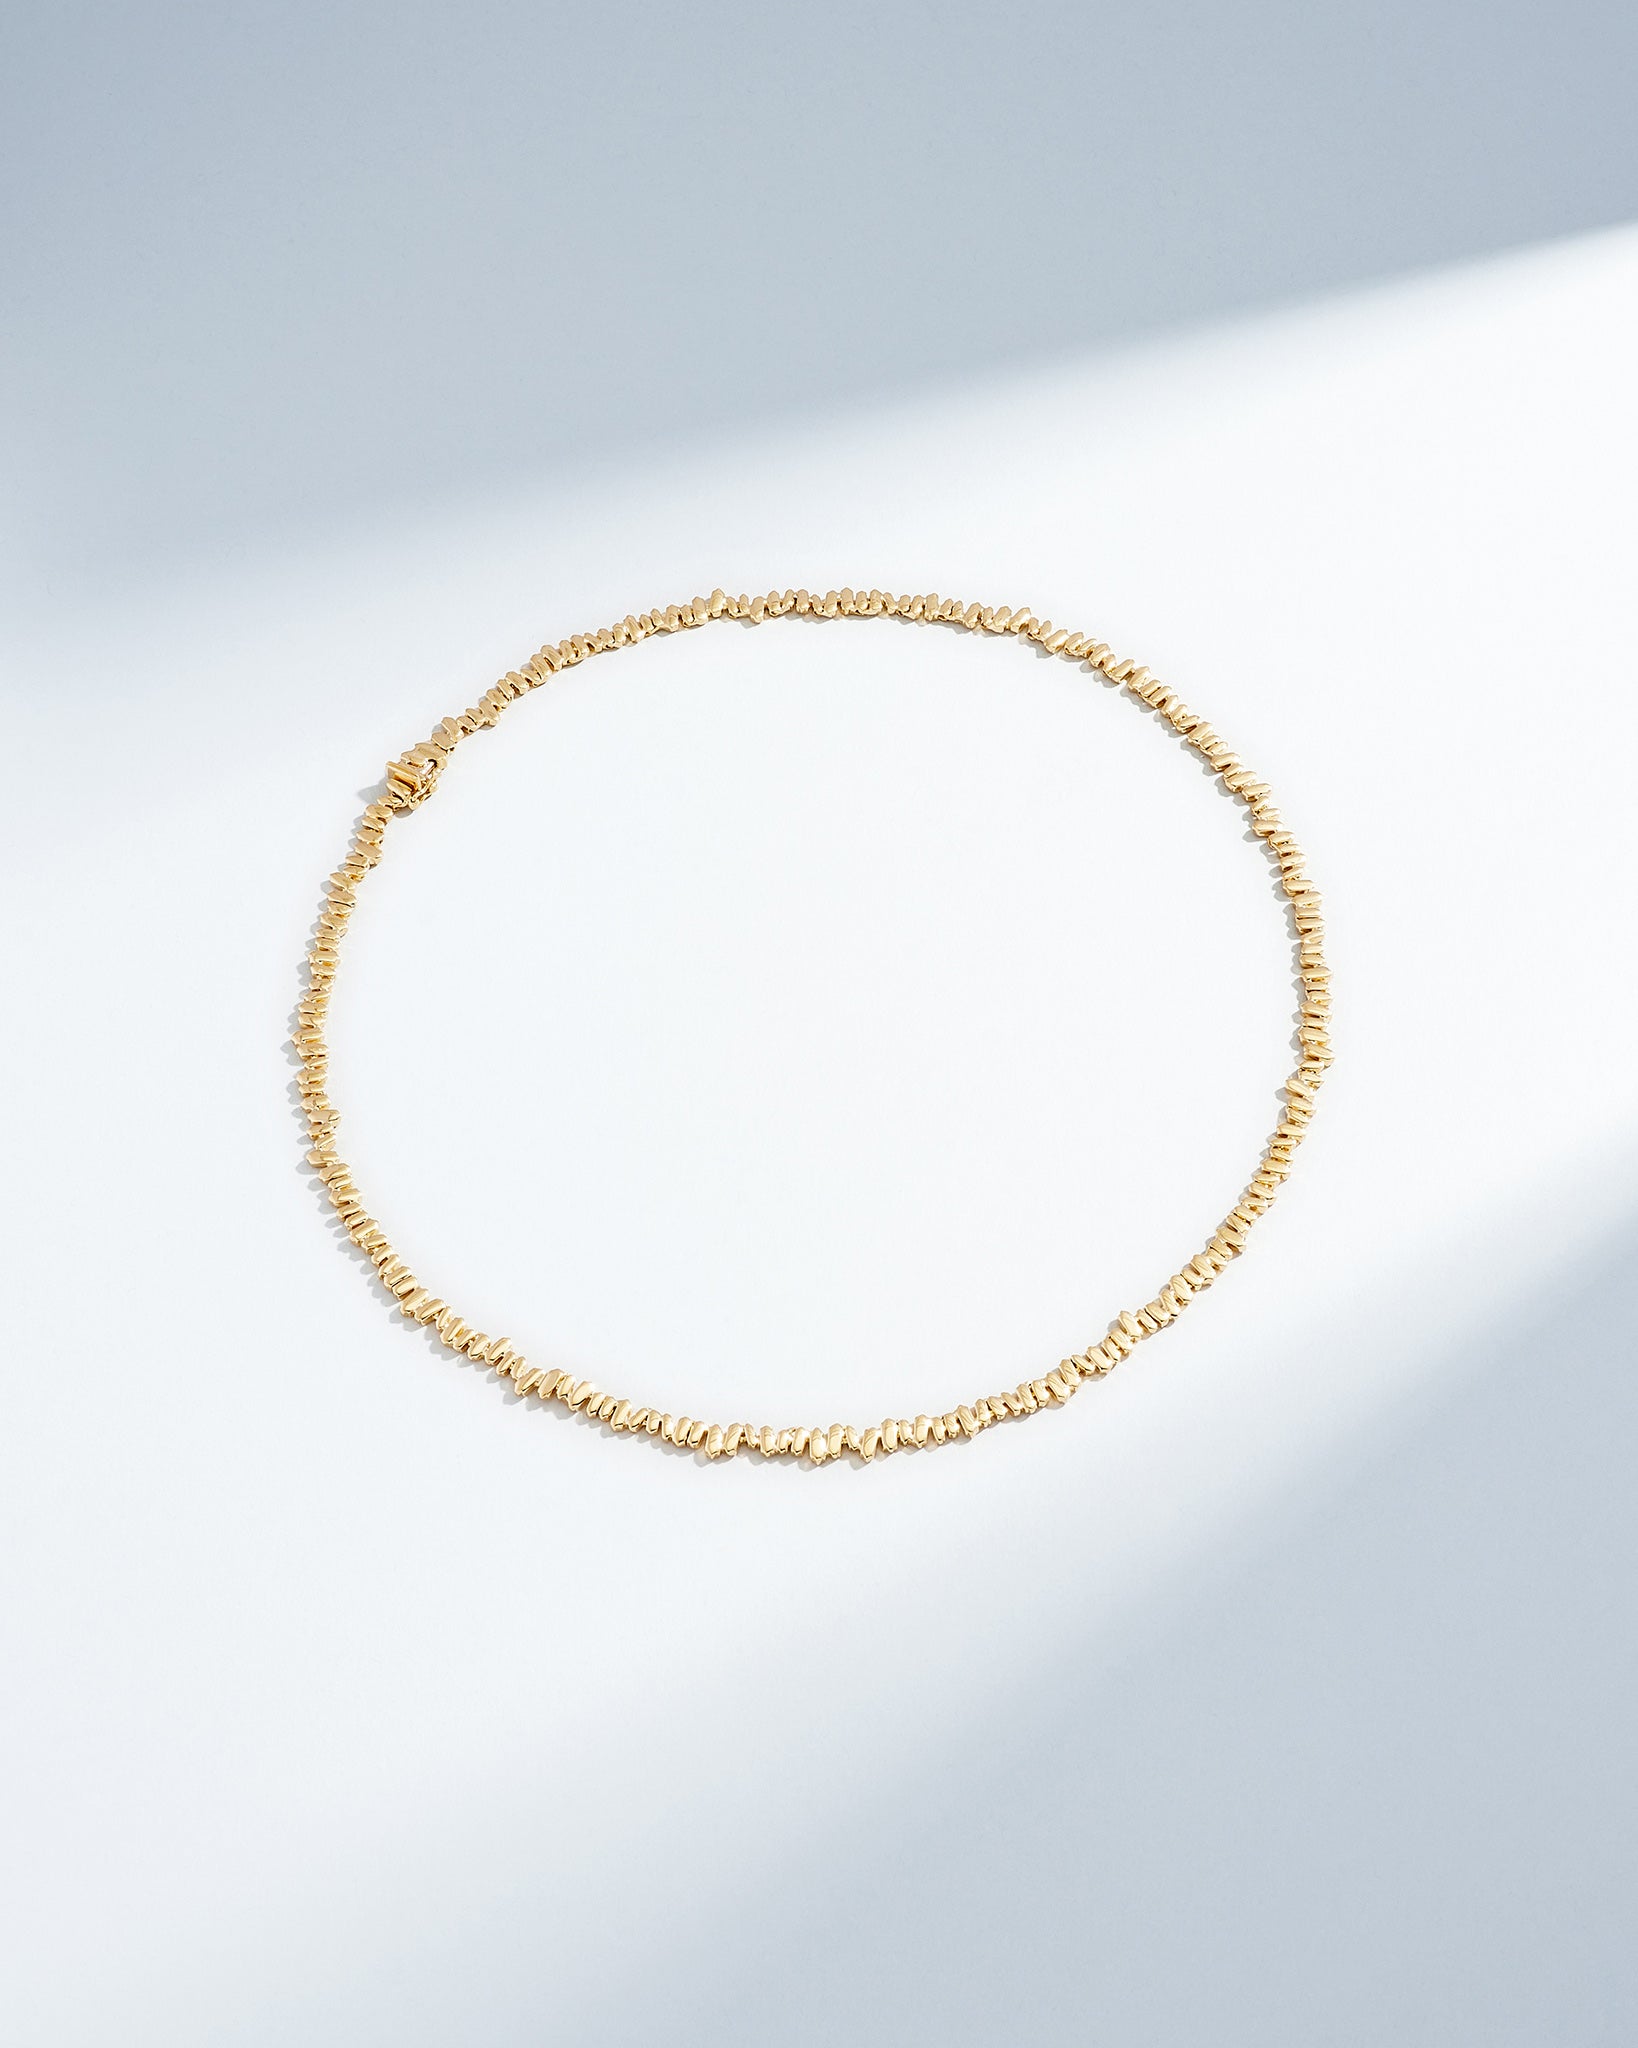 Suzanne Kalan Golden Tennis Necklace in 18k yellow gold